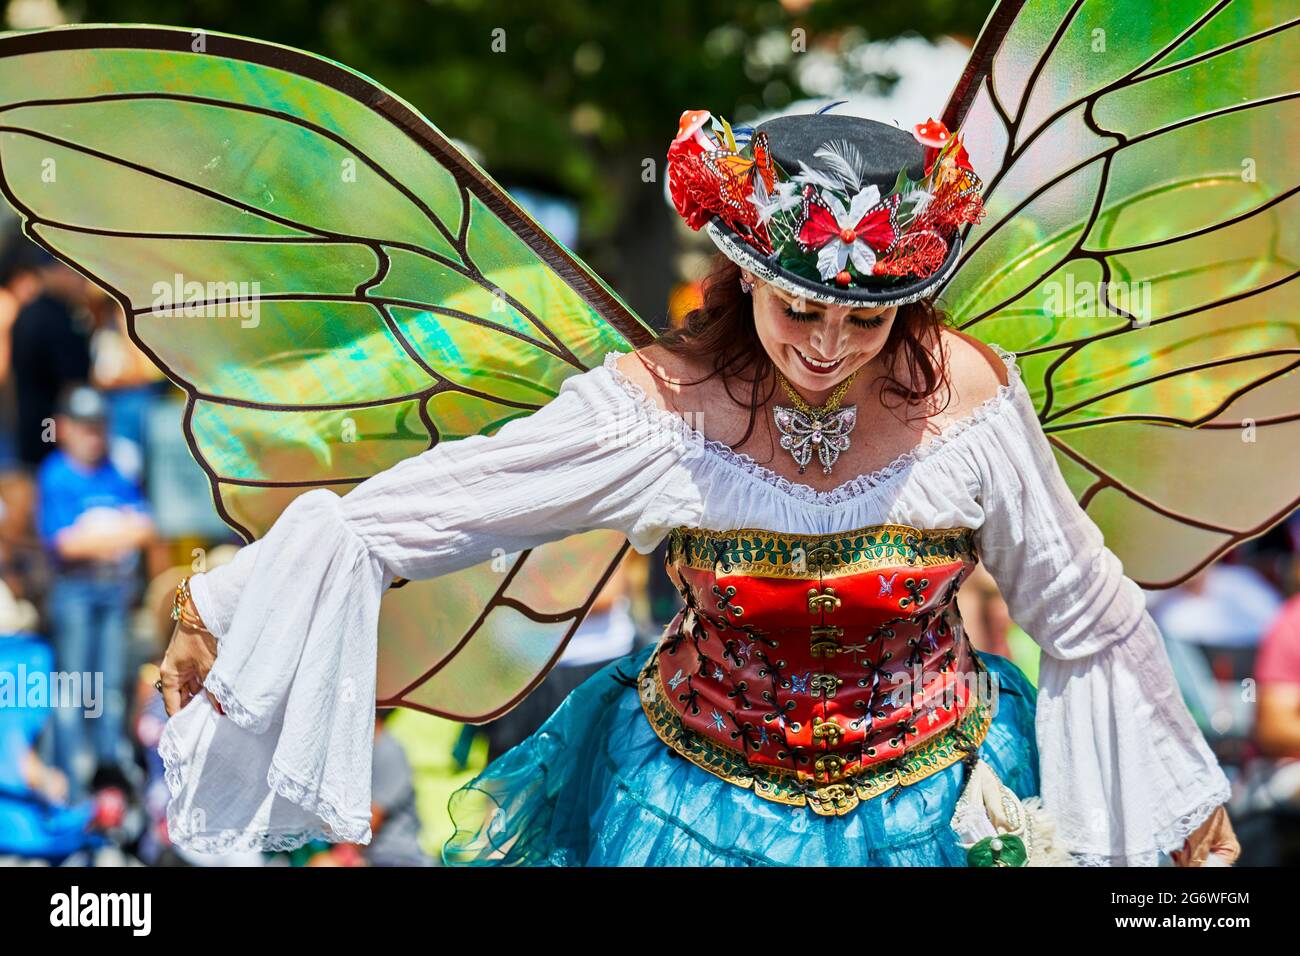 Prescott, Arizona, USA - July 3, 2021: Woman dressed in a butterfly costume with wings bowing to the spectators in the 4th of July parade Stock Photo